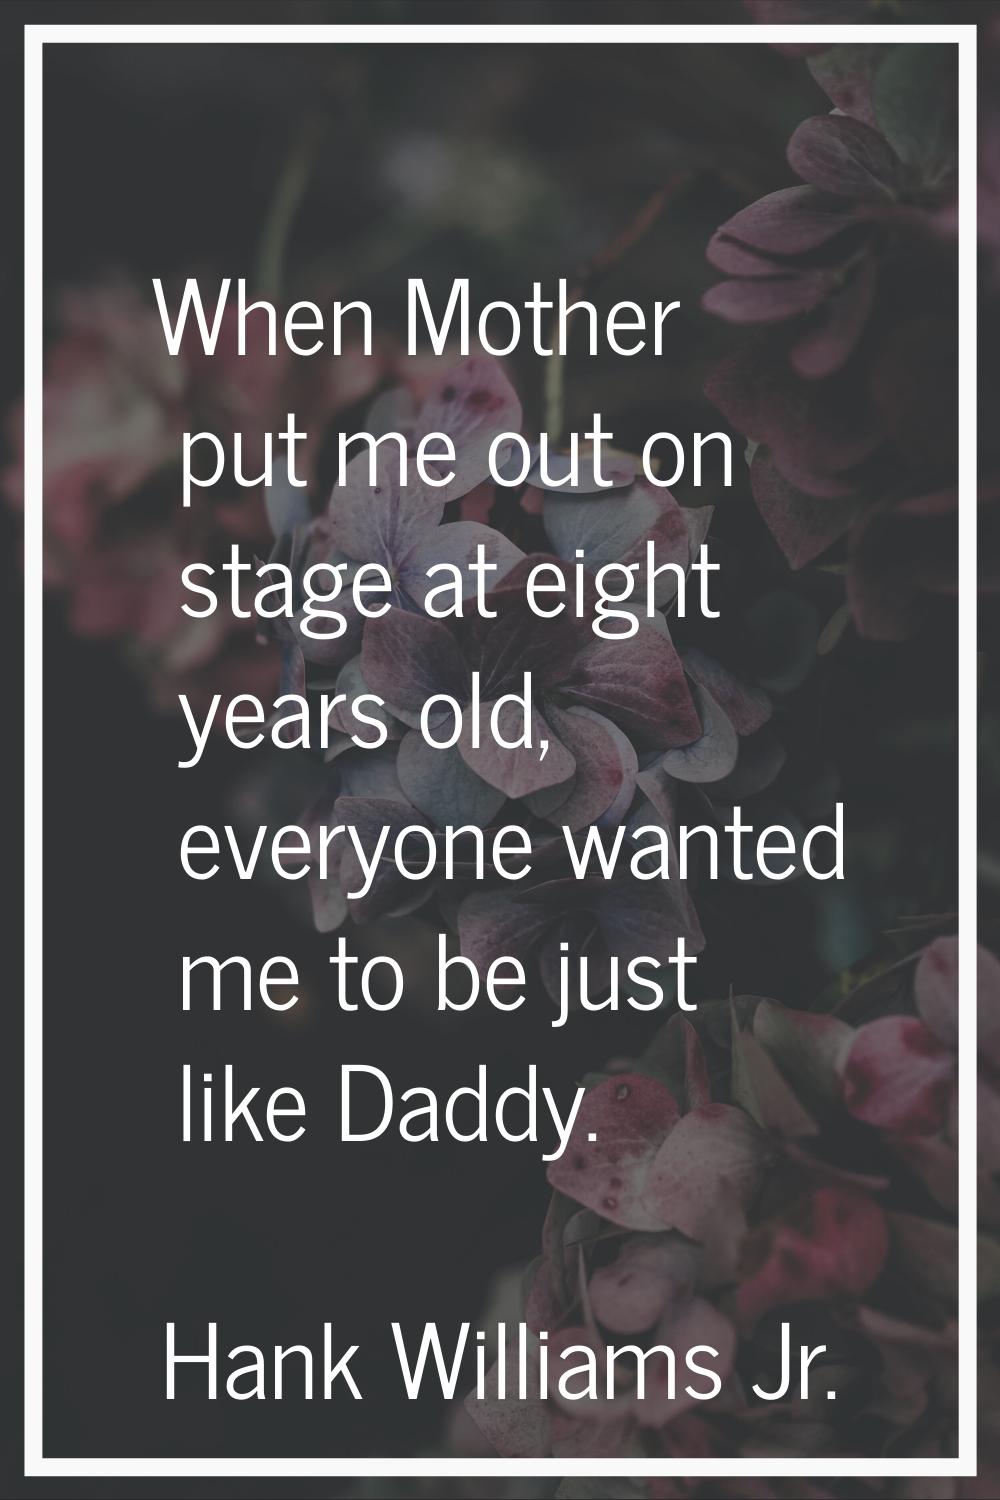 When Mother put me out on stage at eight years old, everyone wanted me to be just like Daddy.